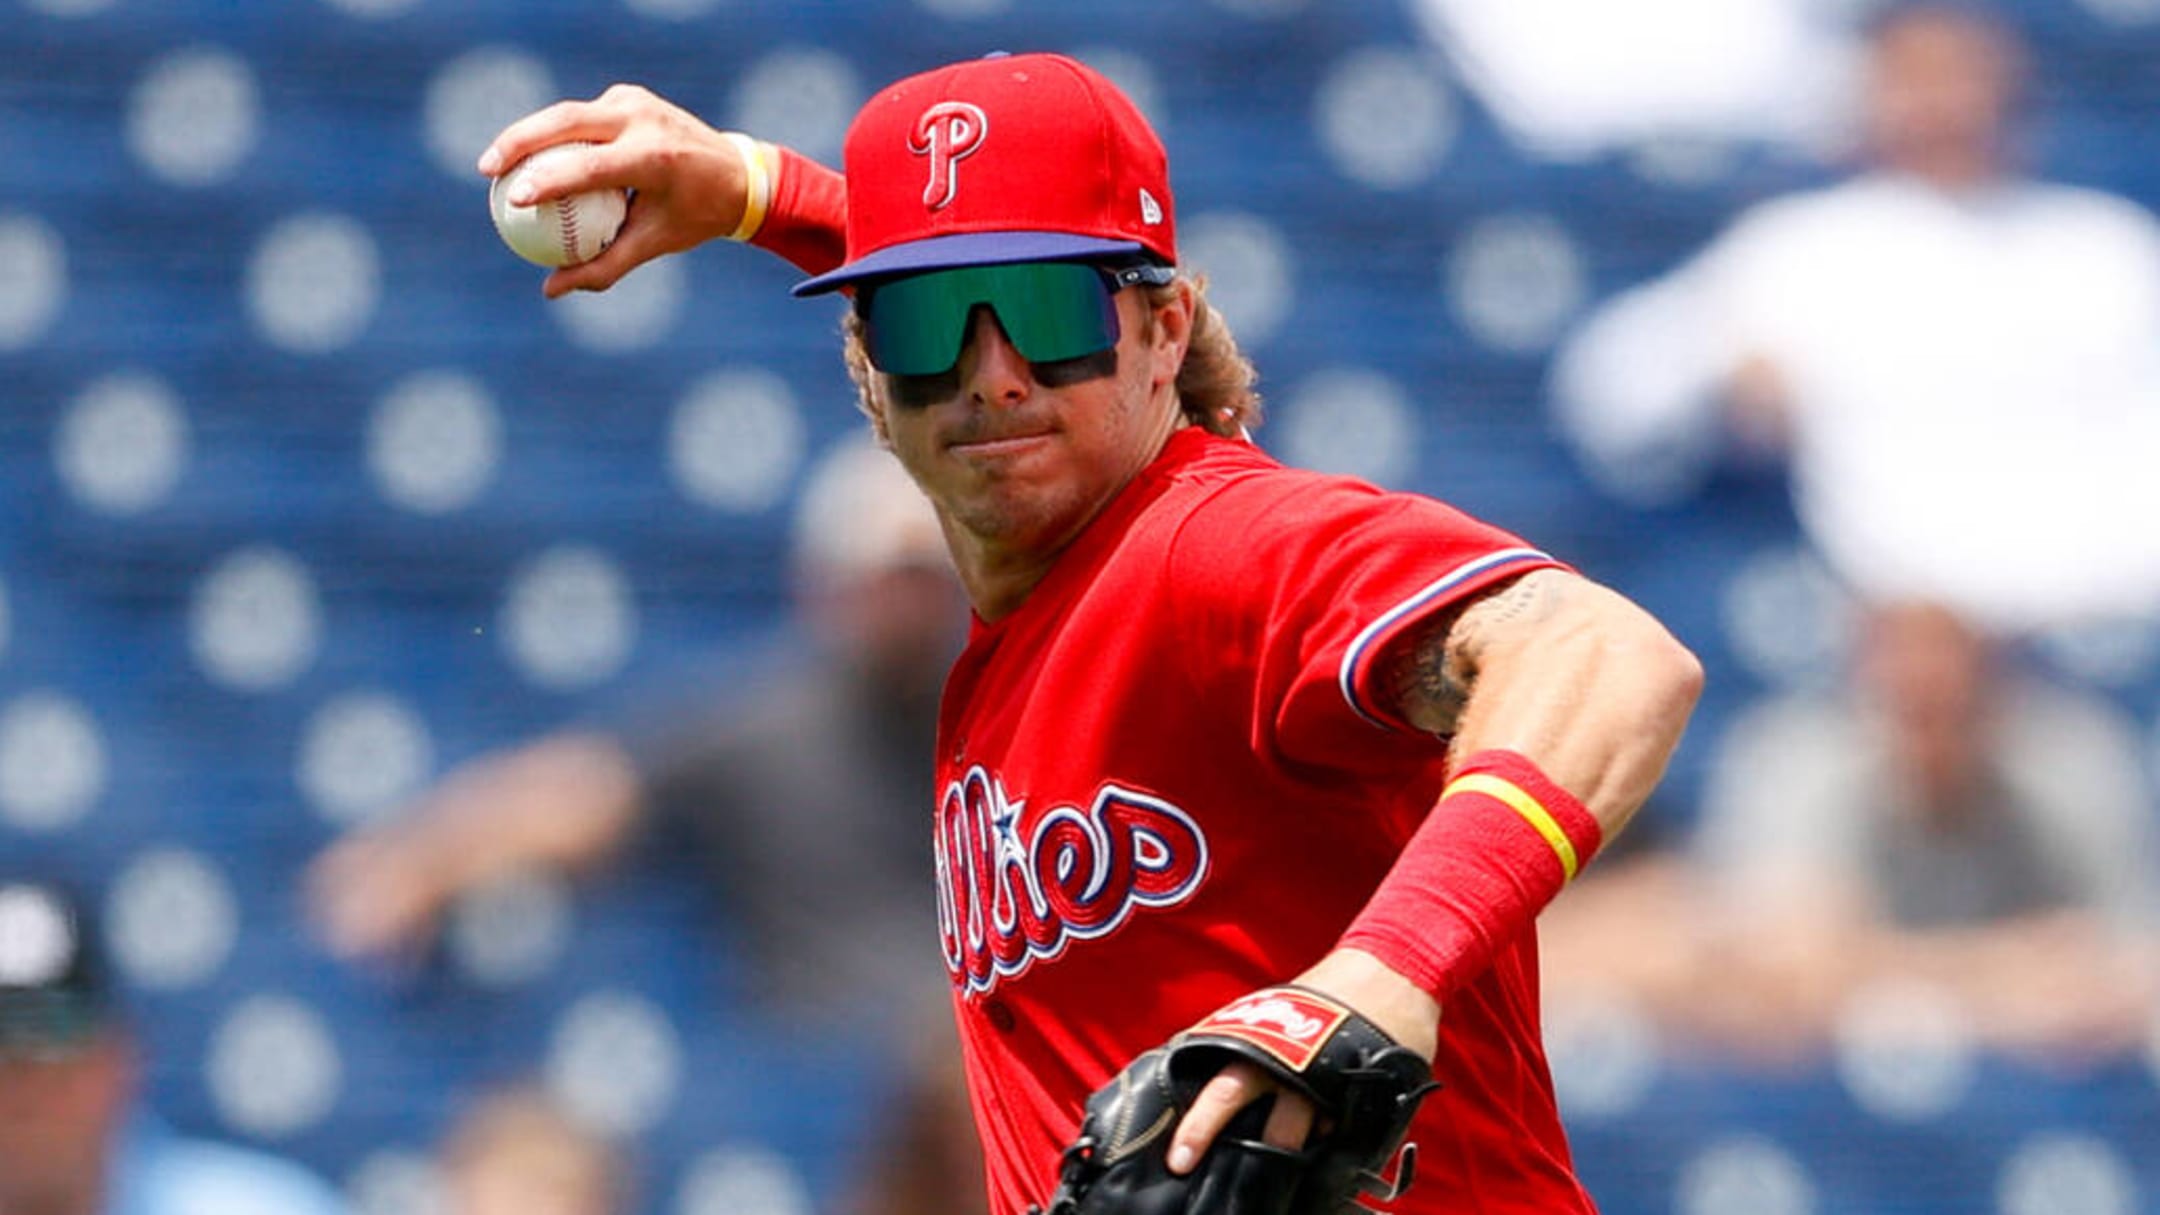 Phillies top prospect Bryson Stott to make Opening Day roster